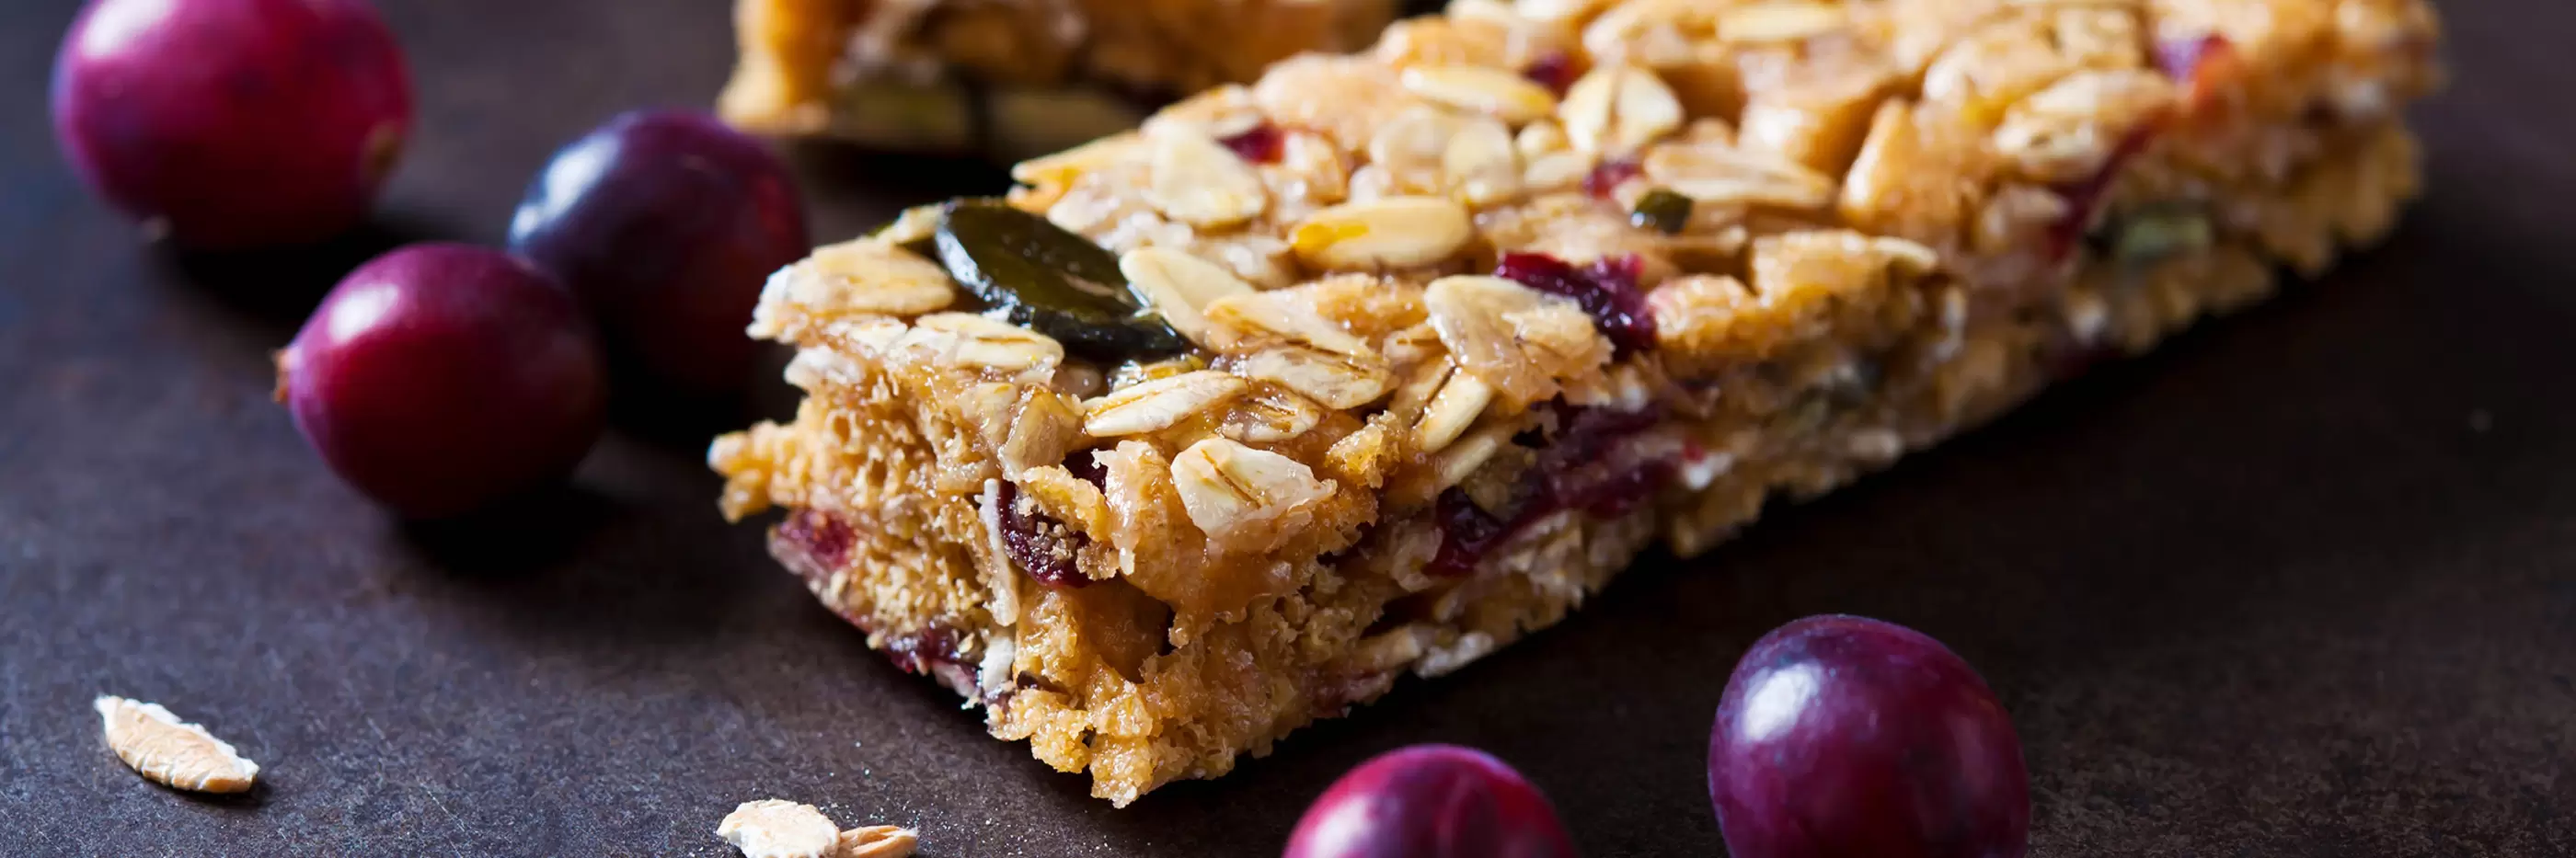 Muesli bars with cranberries and oat flakes on dark background.